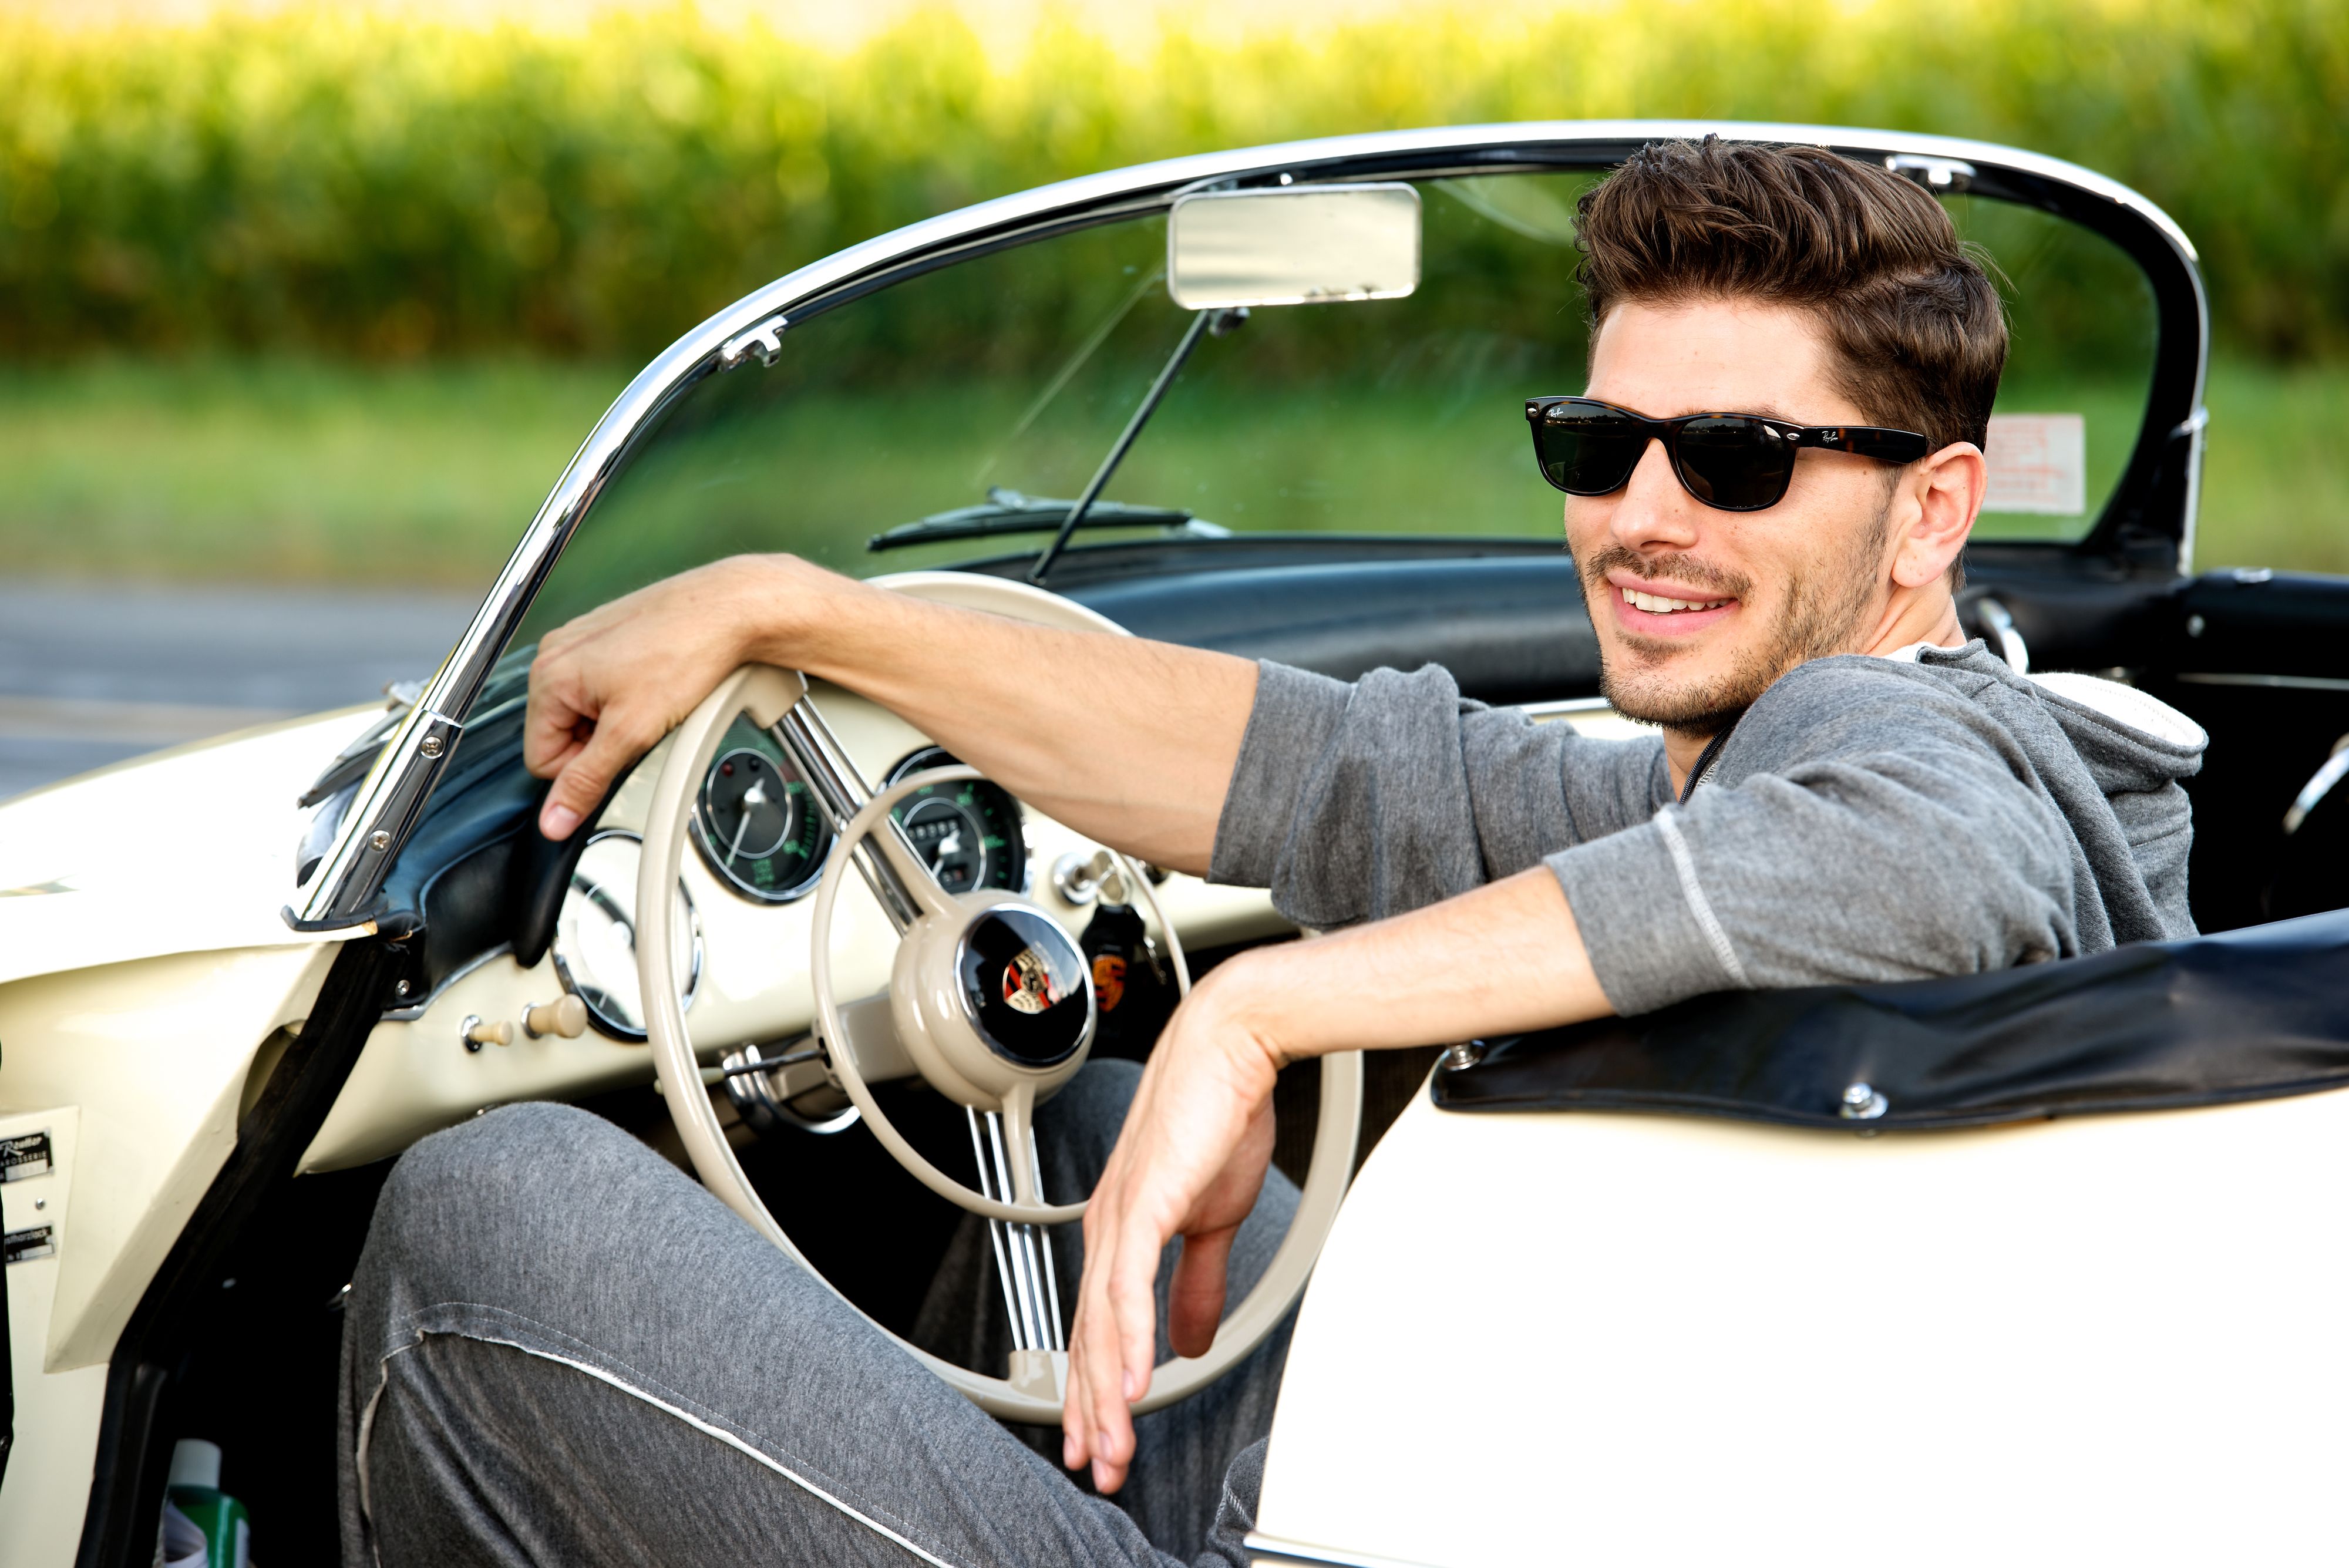 Male model wearing grey outfit and Wayfarer sunglasses sits in white Porsche 356 car